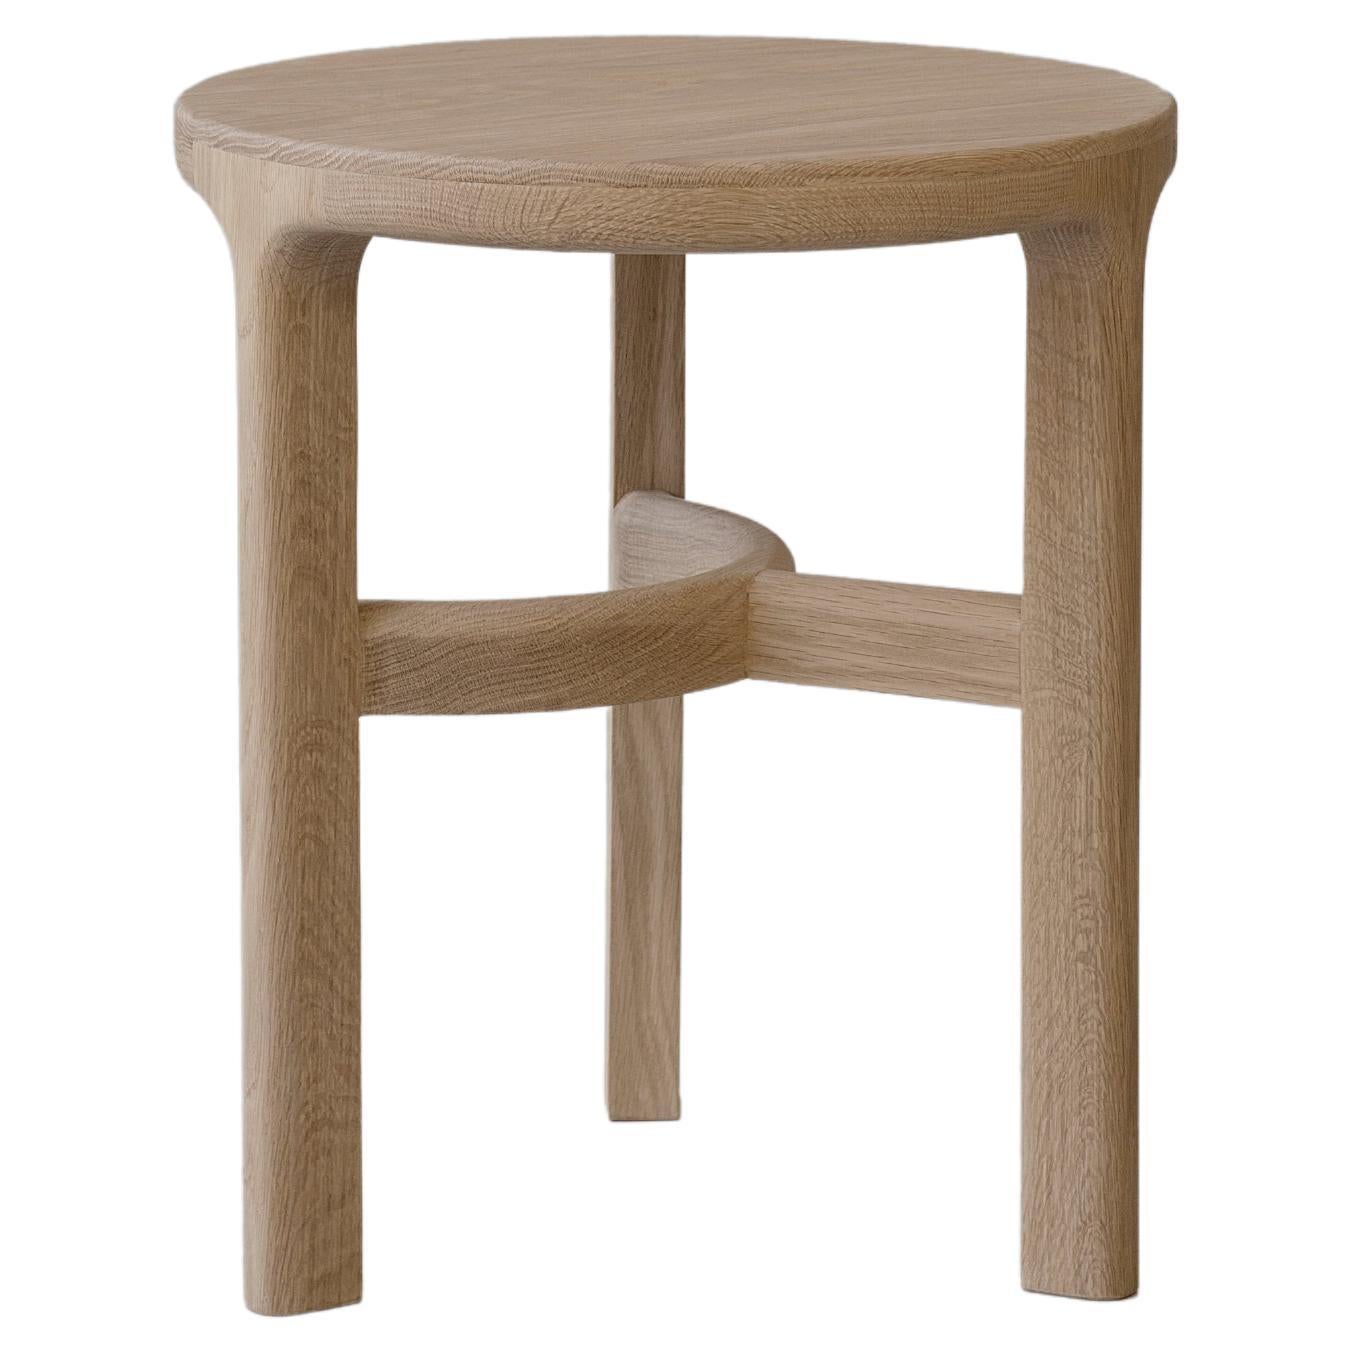 Trasiego Side Table For Sale